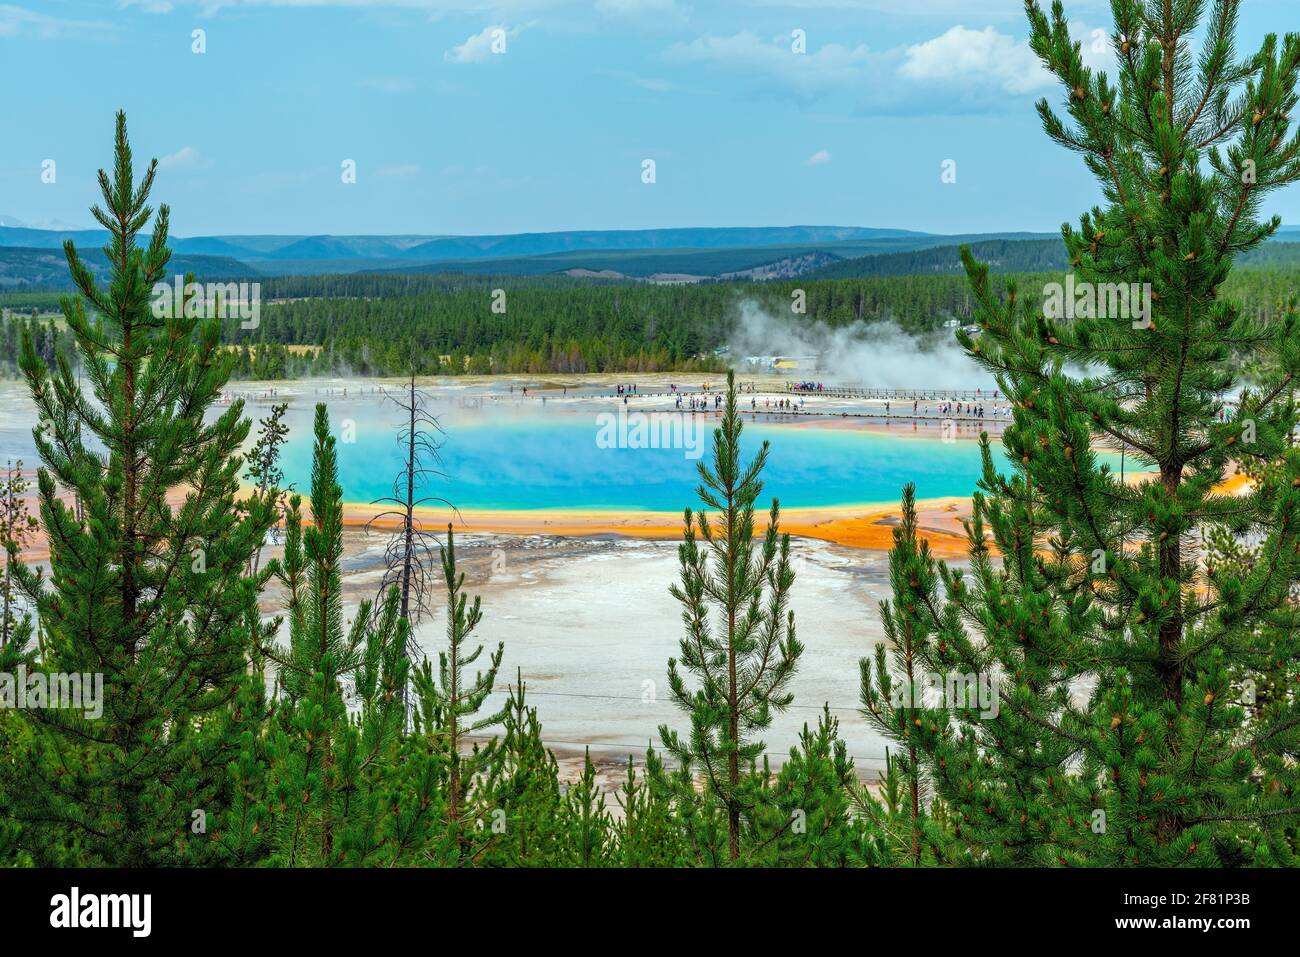 Grand Prismatic Spring, Midway Norris Geyser Basin, parc national de Yellowstone, Wyoming, États-Unis. Banque D'Images